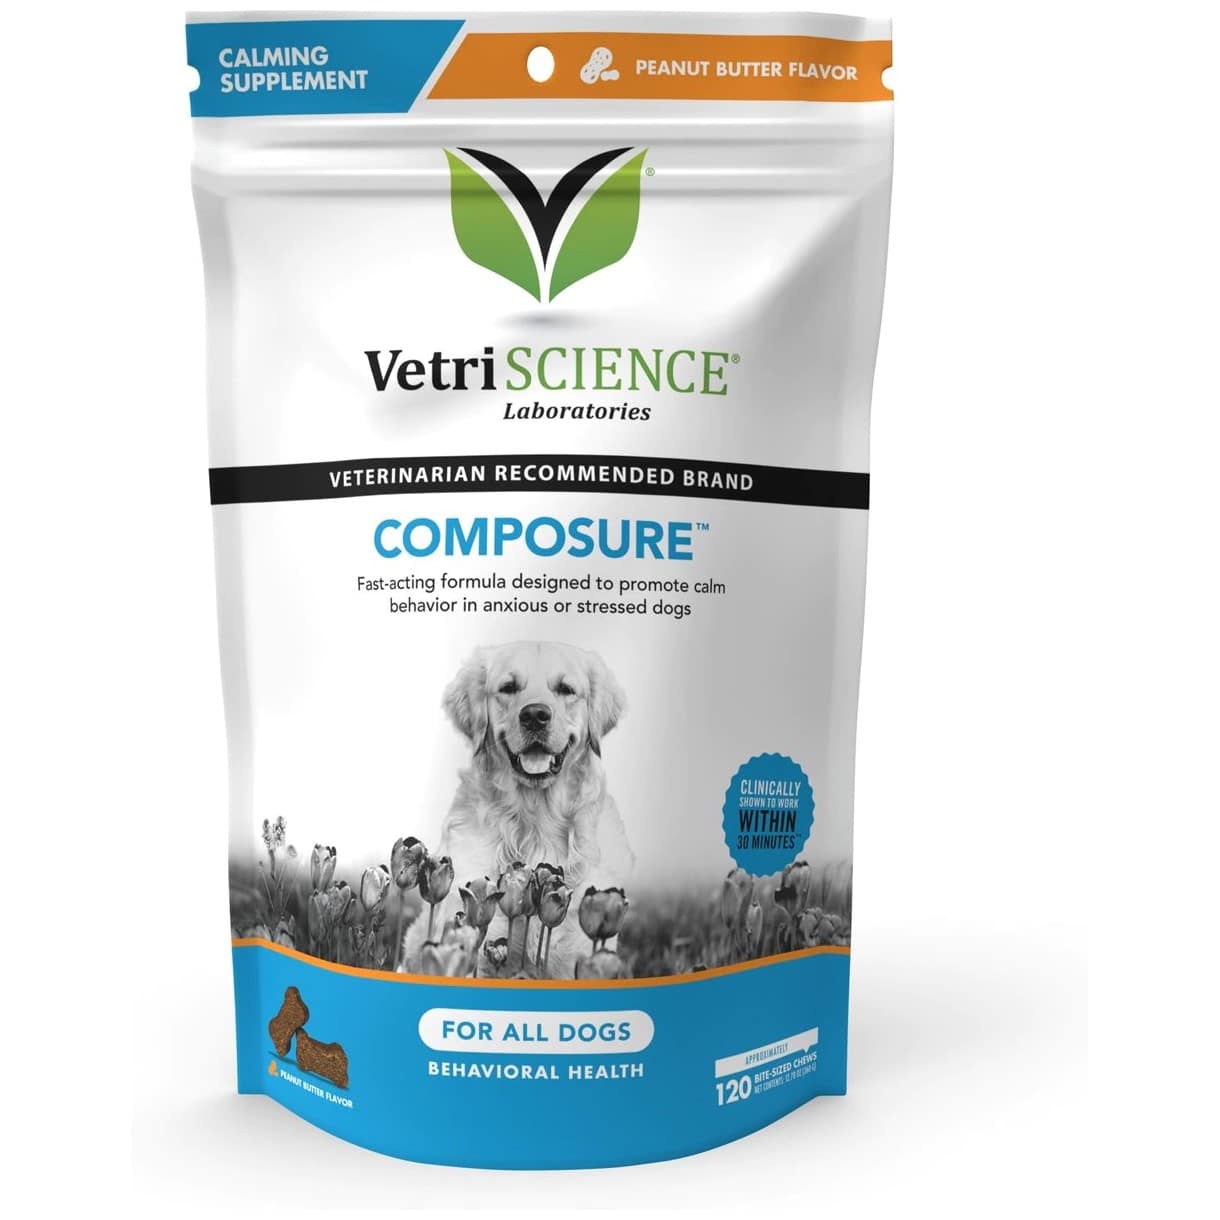 VetriScience Composure Peanut Butter Flavored Chews Calming Supplement for Dogs